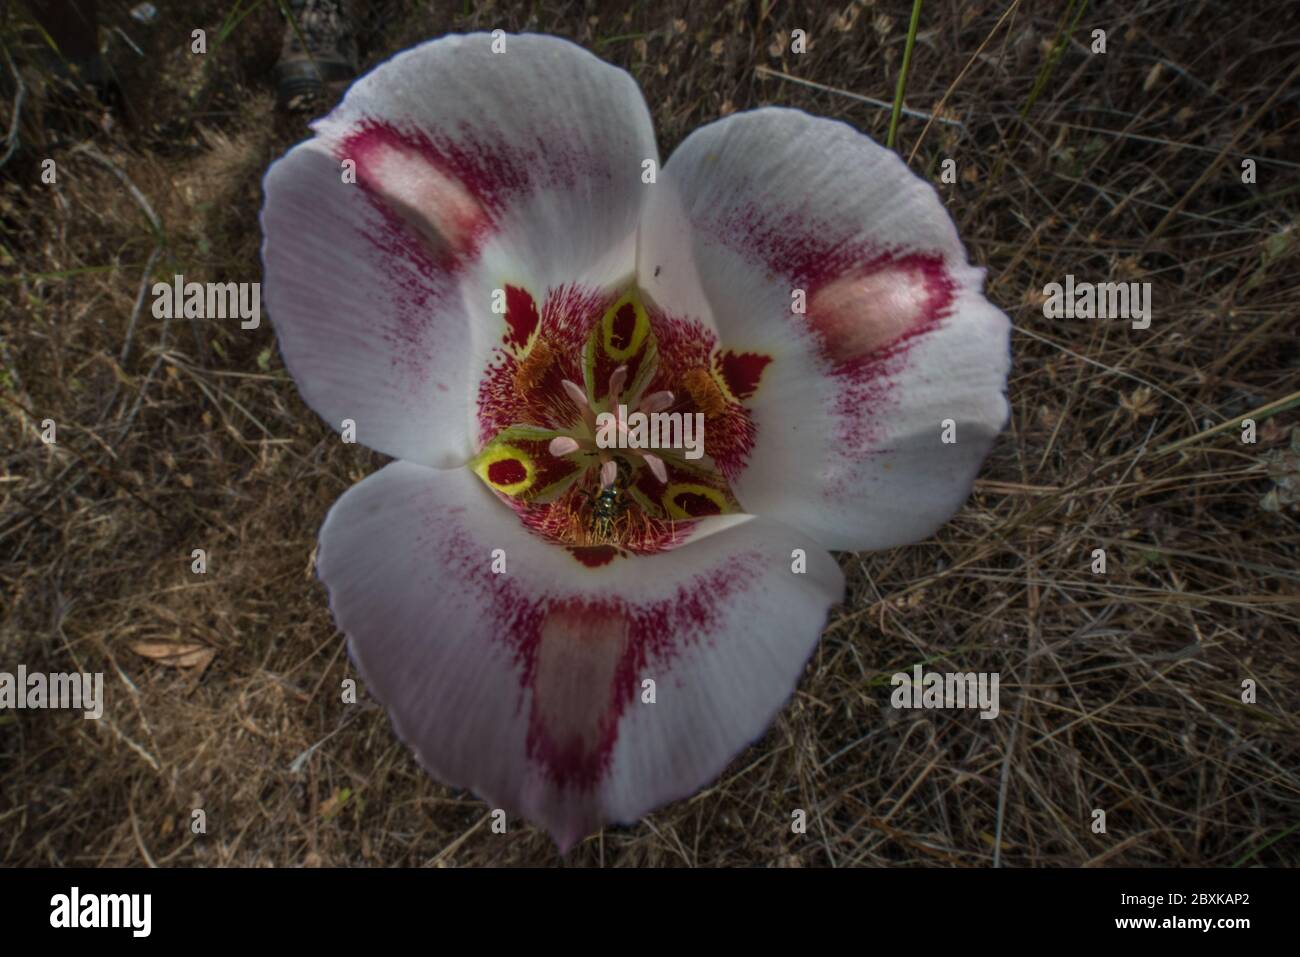 Calochortus venustus, the butterfly mariposa lily is a stunning flower that can only be found growing in California. Stock Photo